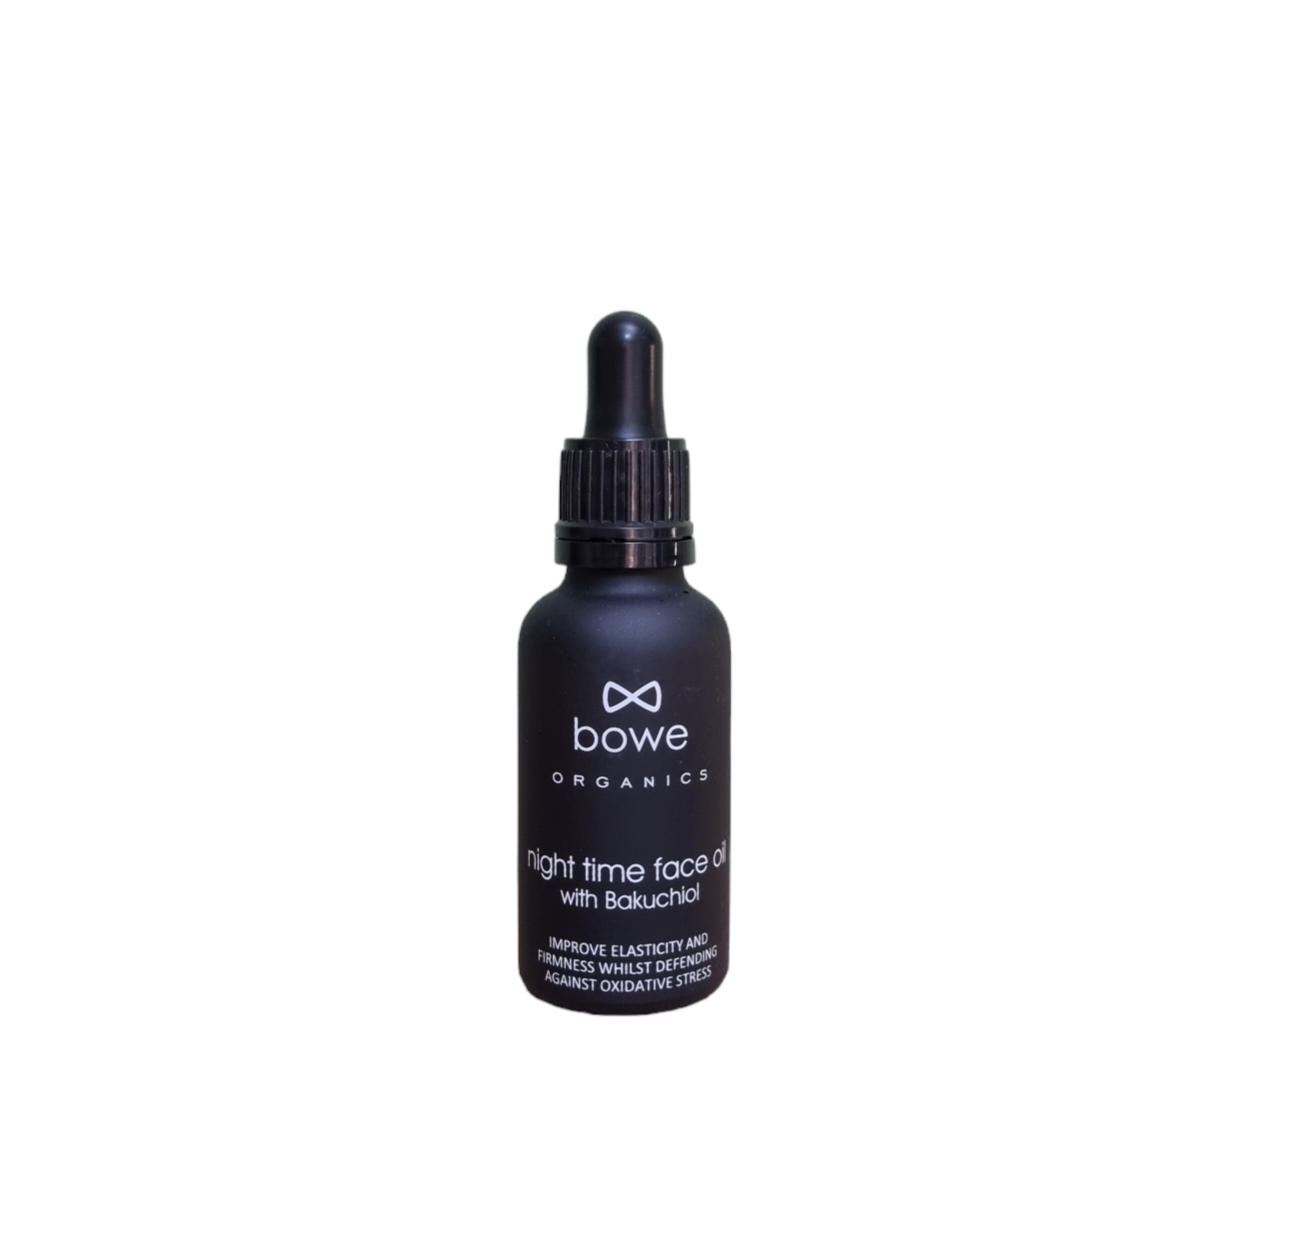 night time face oil made with bakuchiol bio retinol in a black frosted glass bottle and pipette. blended with essential oils for a natural fragrance